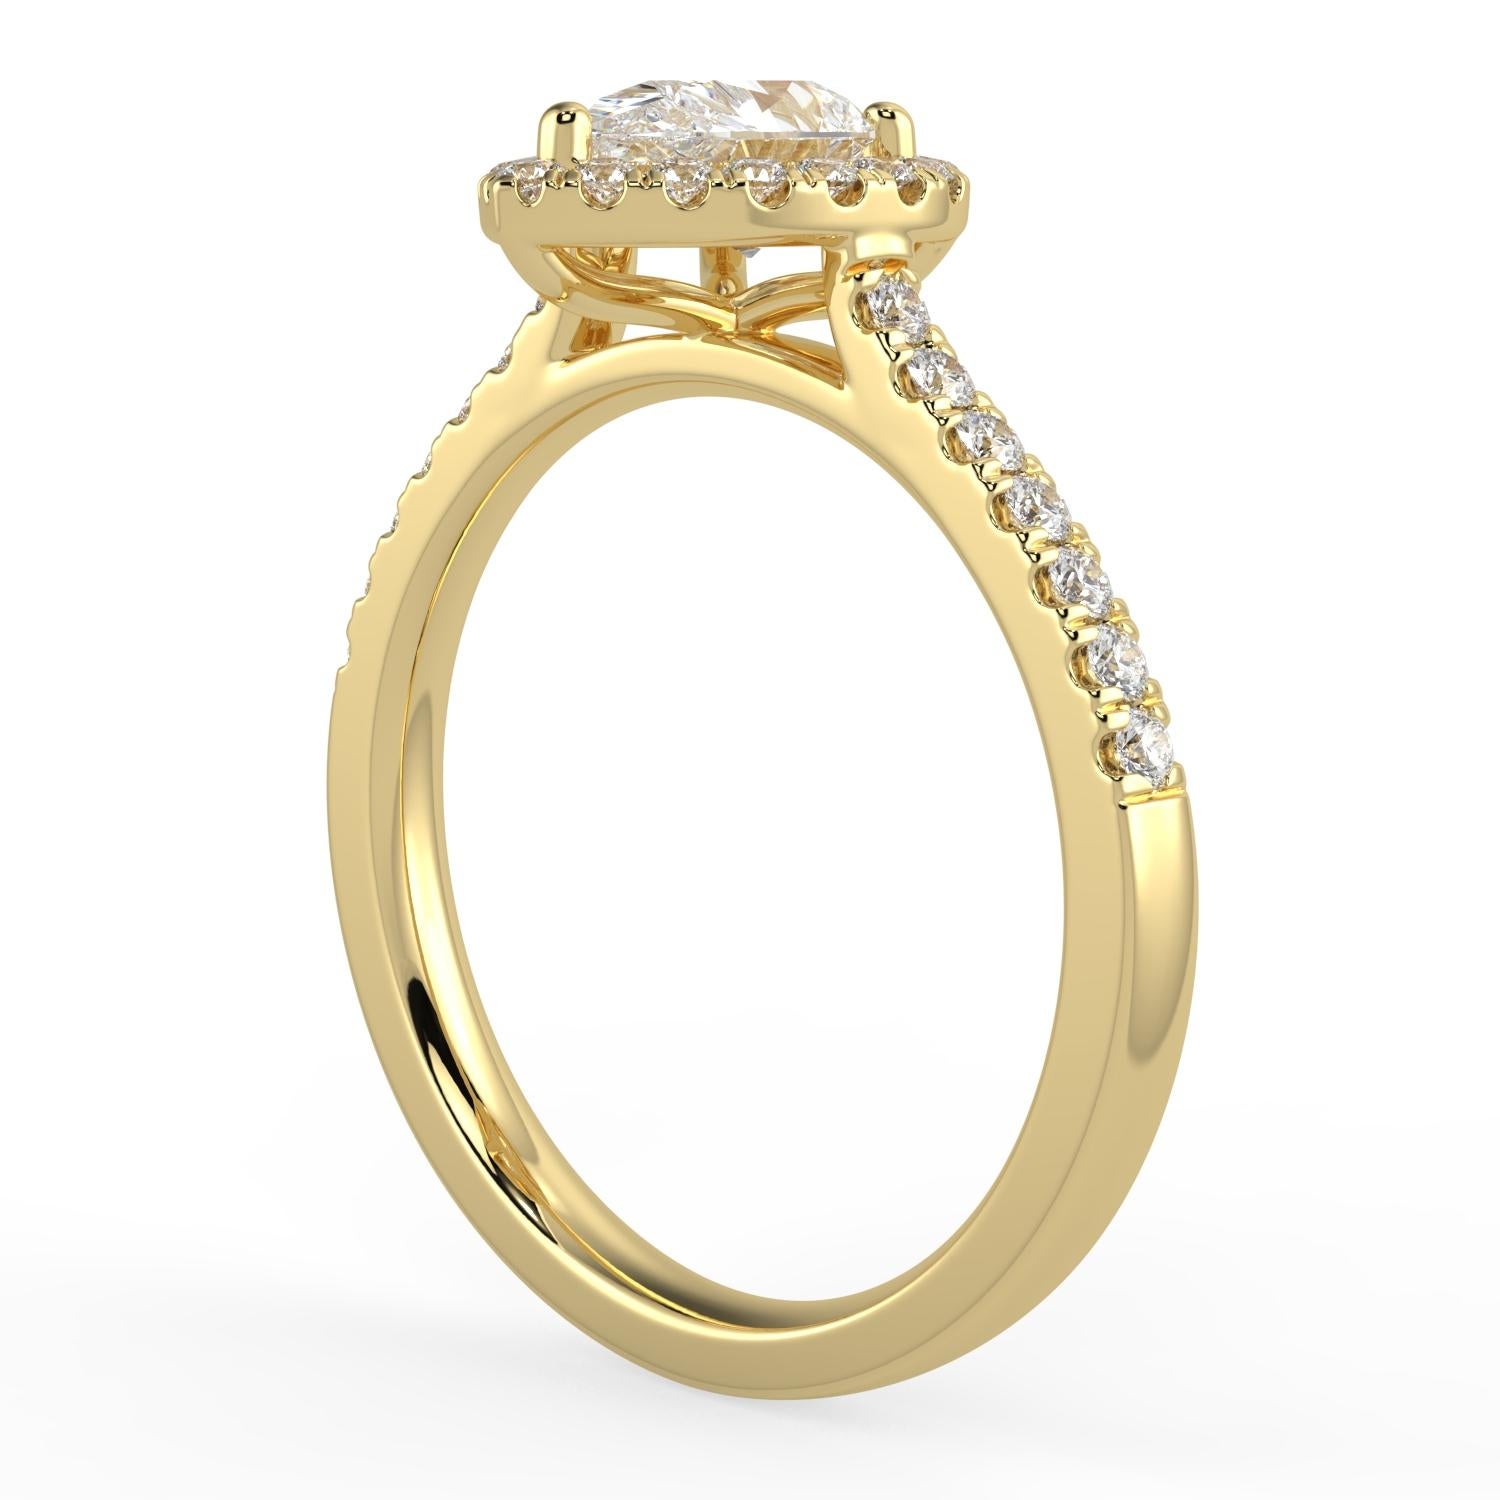 AAMIAA DIAMOND RING
1ct Natural Diamond G-H Color SI Clarity Perfect Design Shape Halo Fashion Stunning Promise Ring 14K Yellow Gold

Specification:
Brand: Aamiaa
Metal: Yellow Gold
Metal Purity: 14k
Center Diamond Shape: Pear
Design: Halo
Center